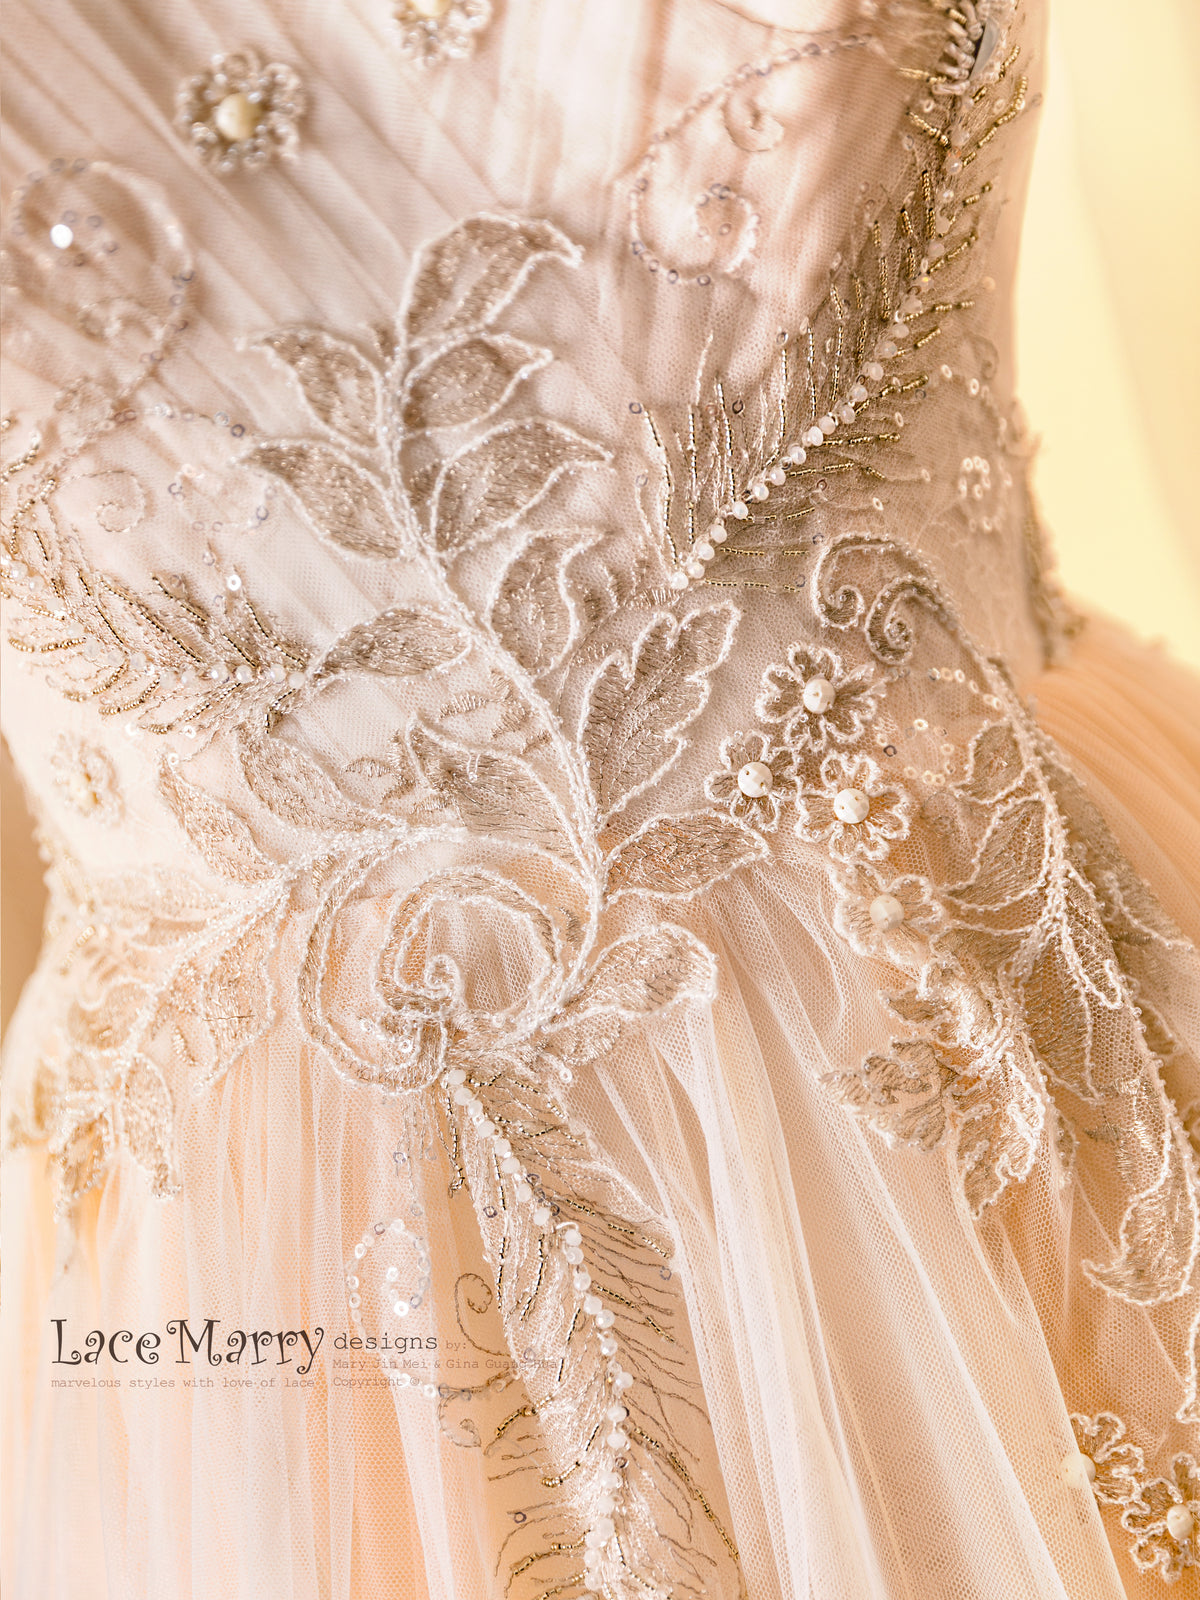 Pearl Stretch Lace Jersey Gowns | Miami Gowns Design [Handmade Design] Medium